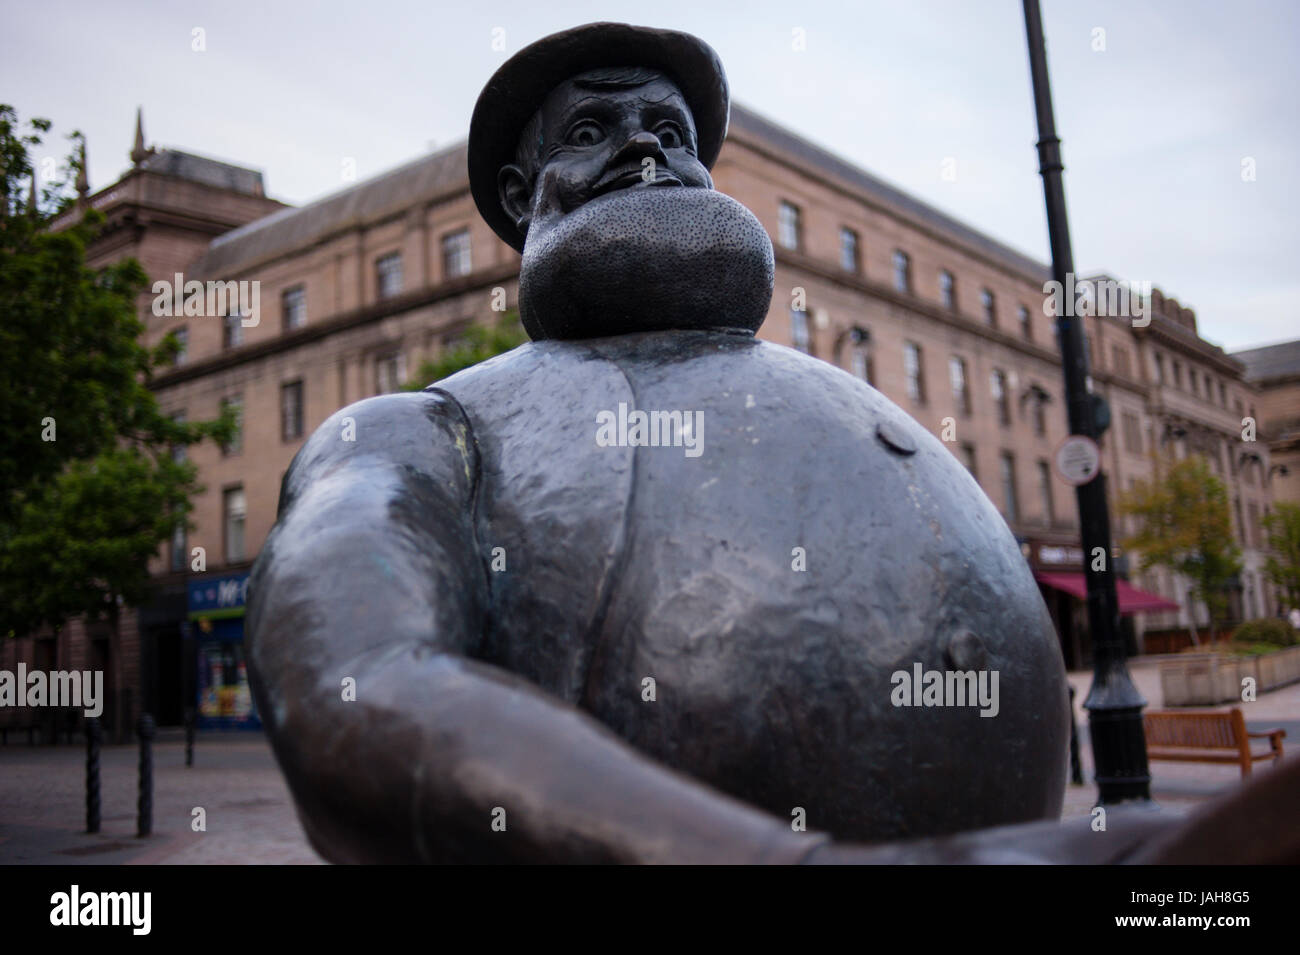 The statue of Desperate Dan in Dundee City Centre alongside a statue of Beano character, Minnie the Minx. Dundee, Scotland. Stock Photo